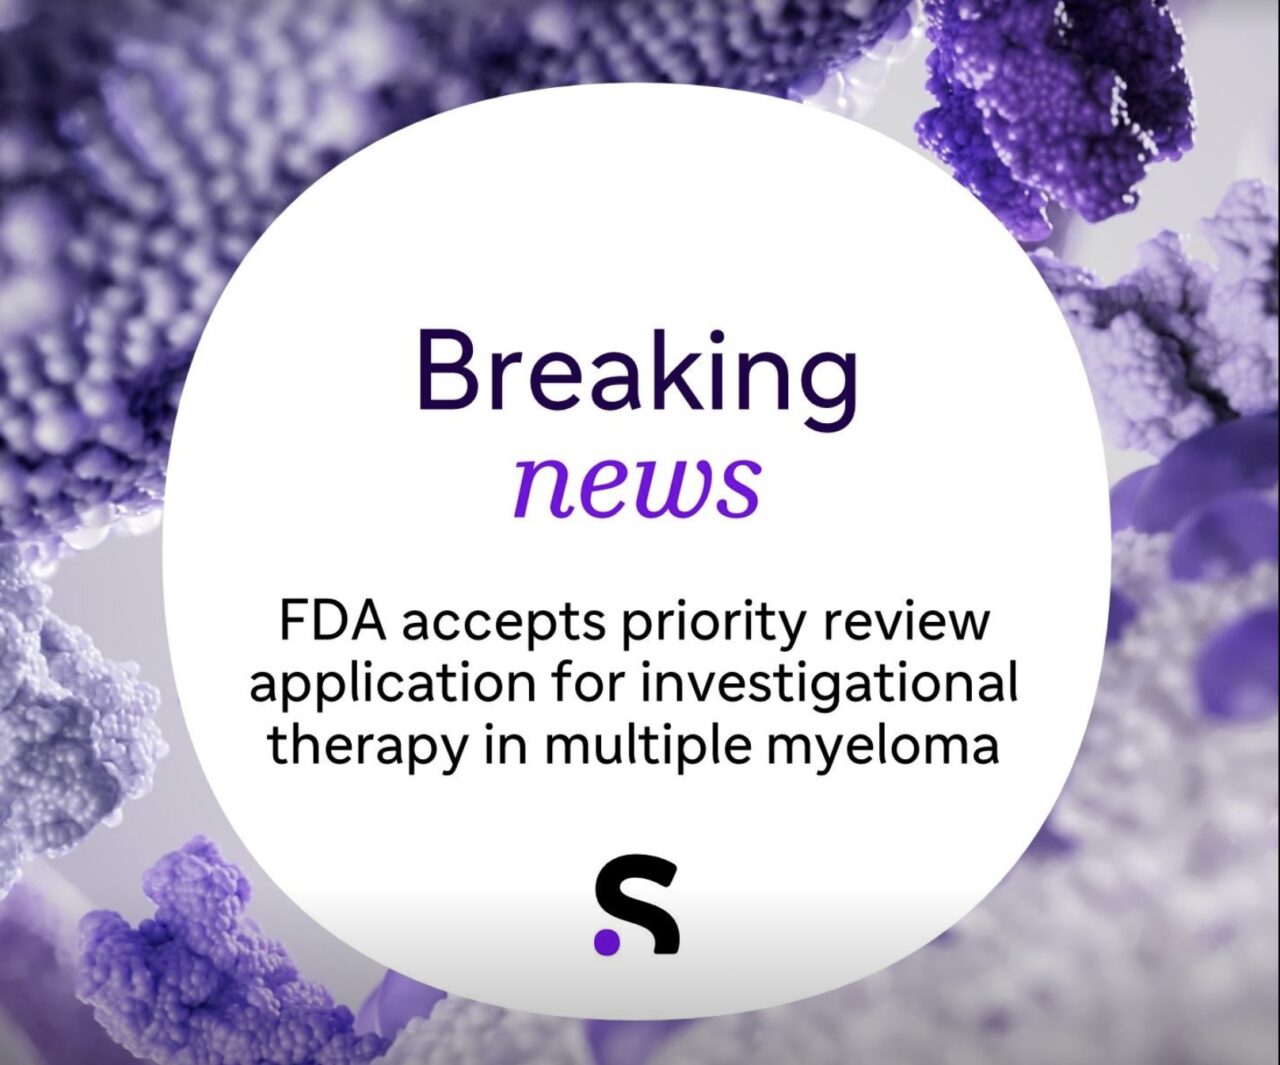 Tom Snow: The FDA accepted for Priority Review Sanofi’s application for investigational therapy in multiple myeloma